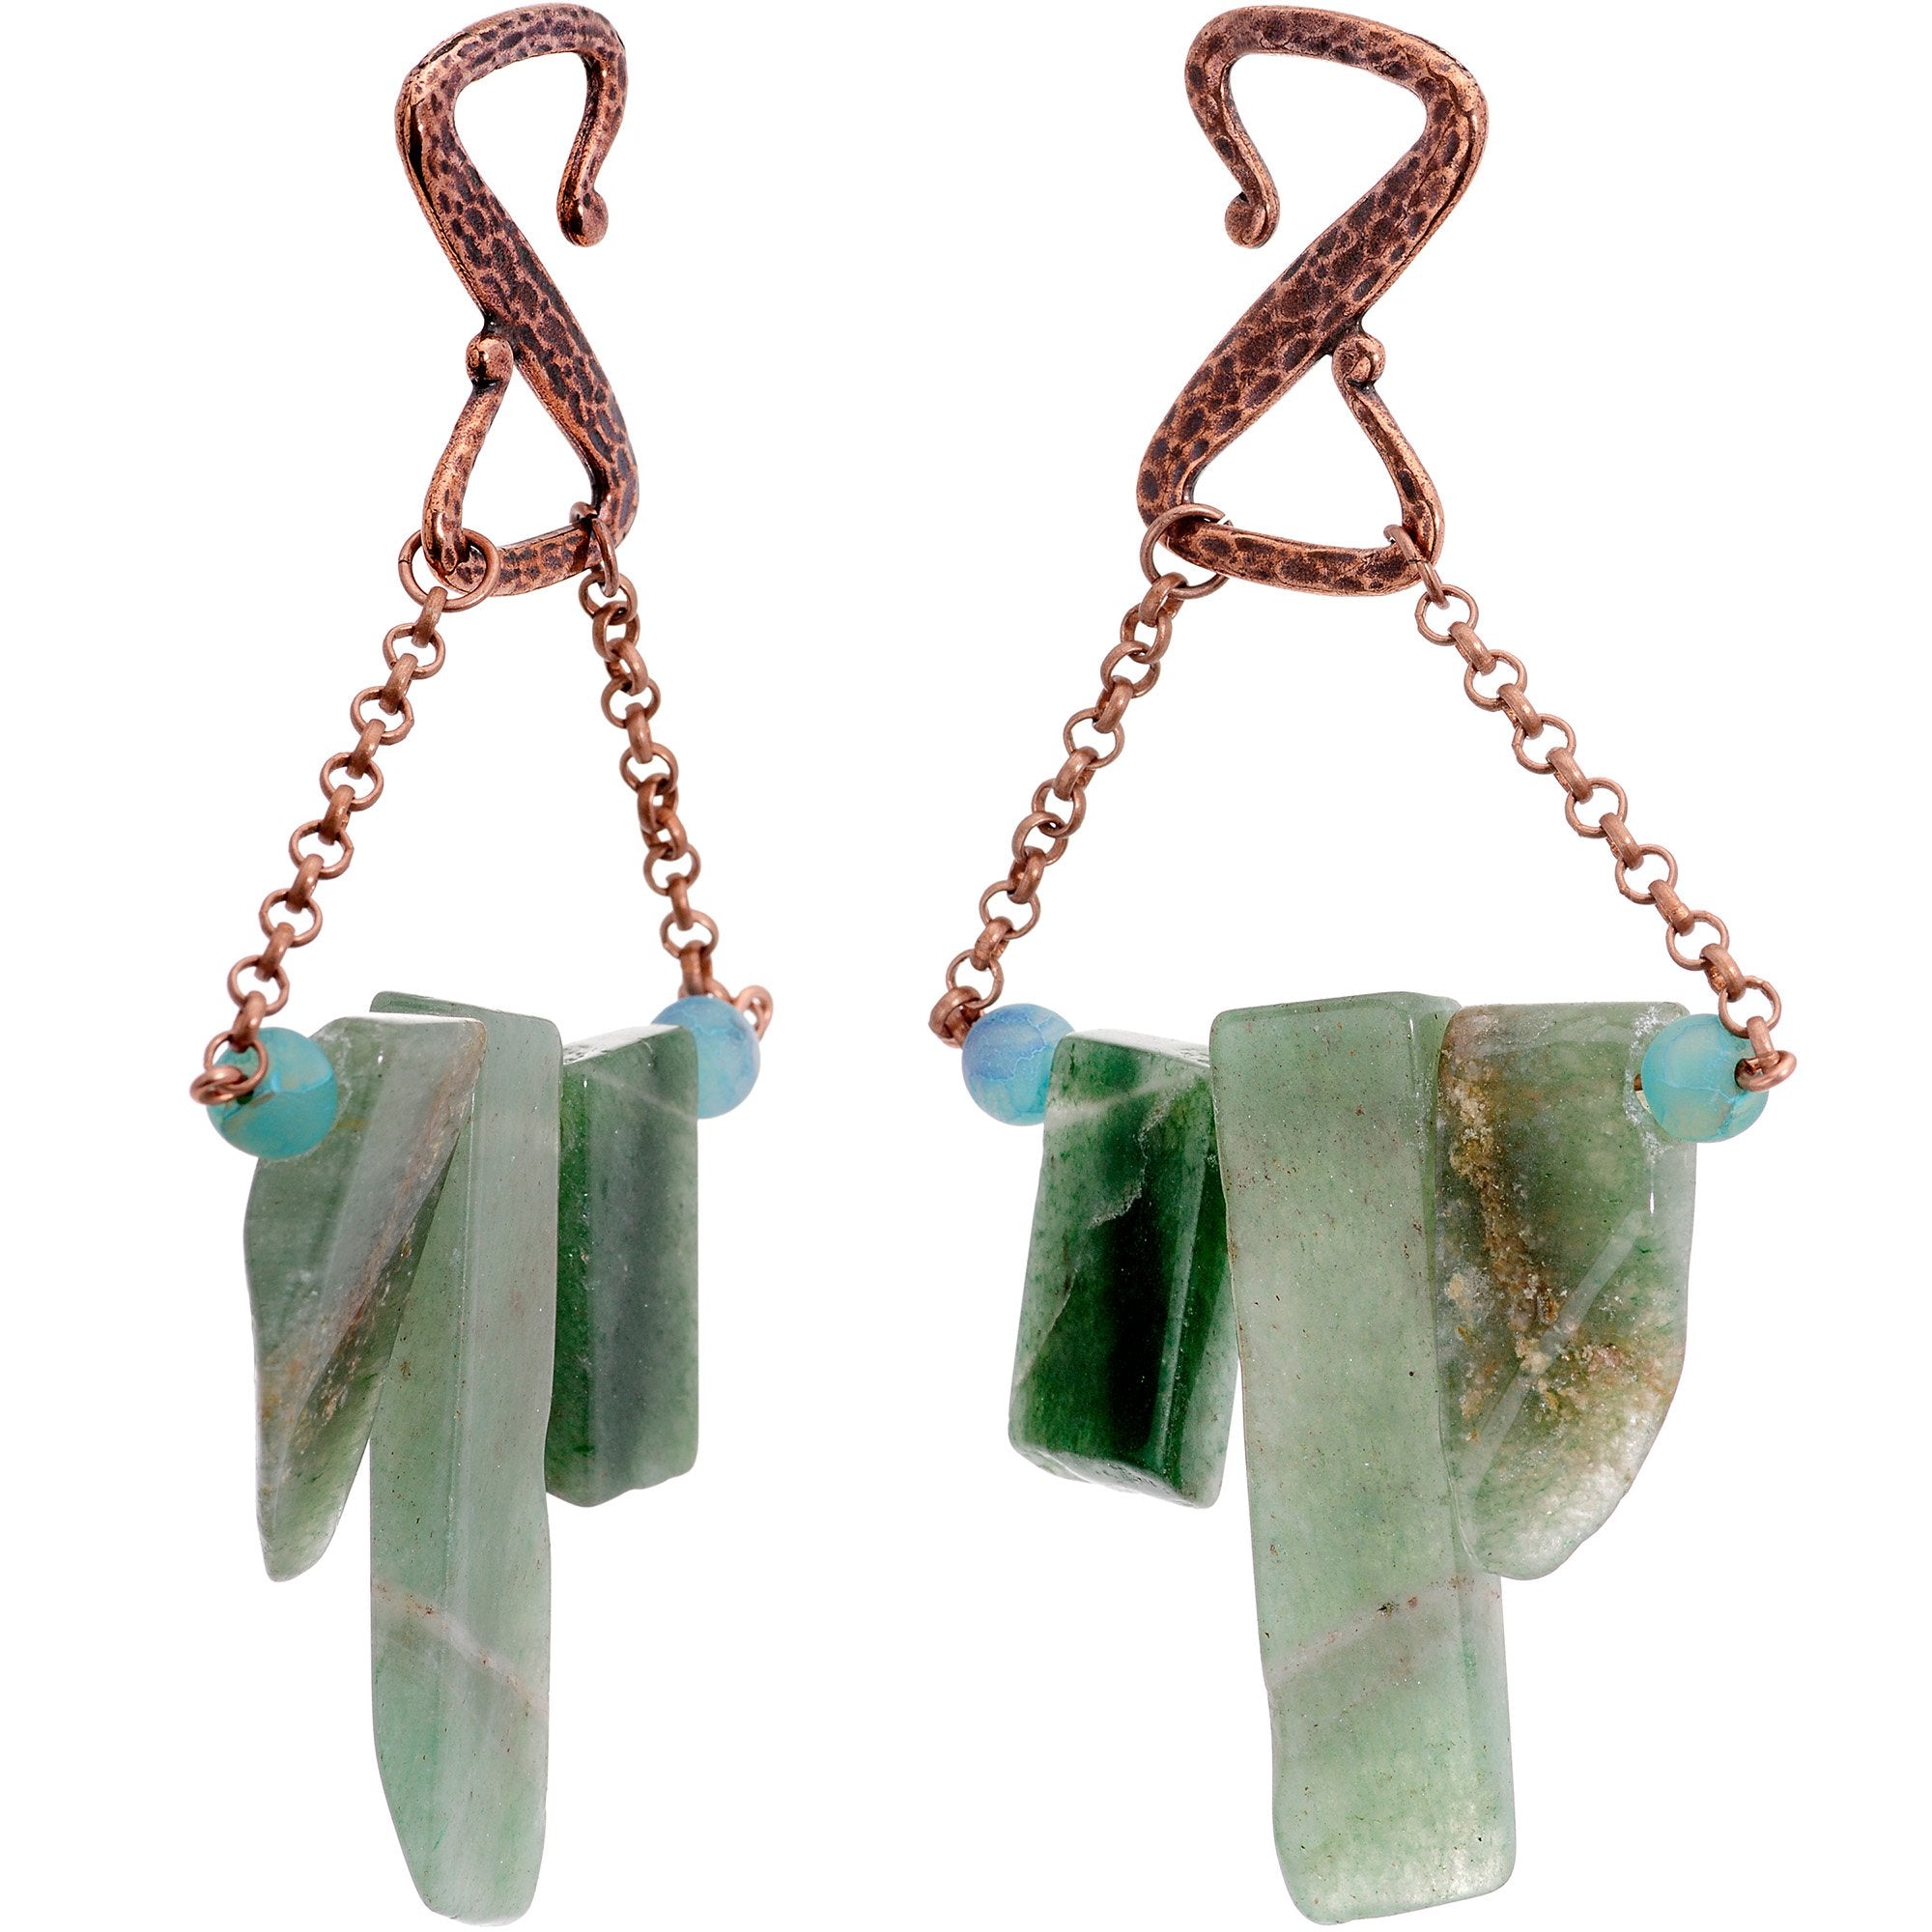 Handcrafted Copper Plated Sea Green Agate Stone Ear Weights